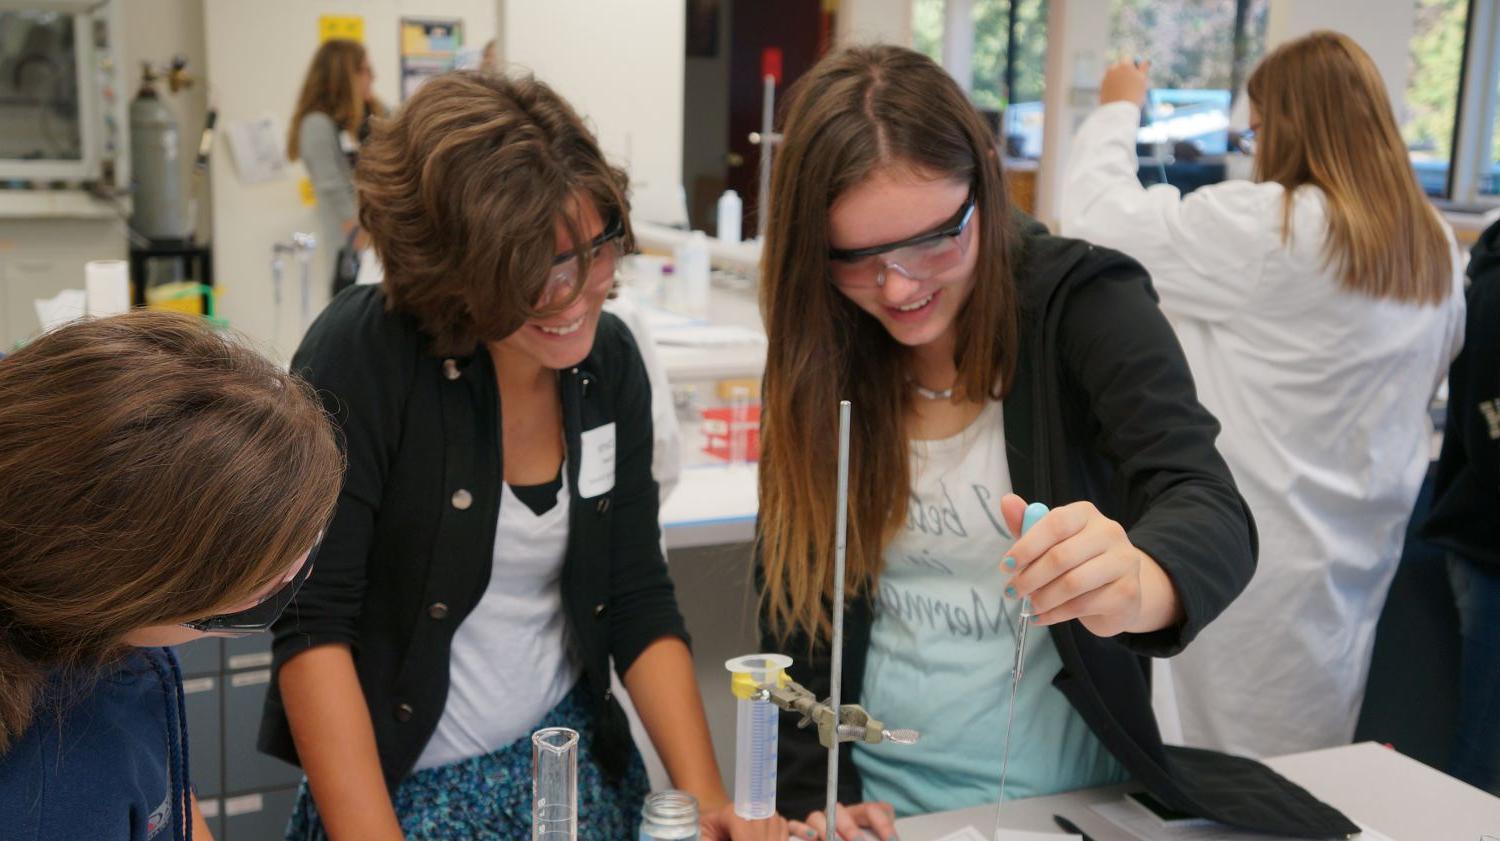 Young women running science experiments in a lab setting.